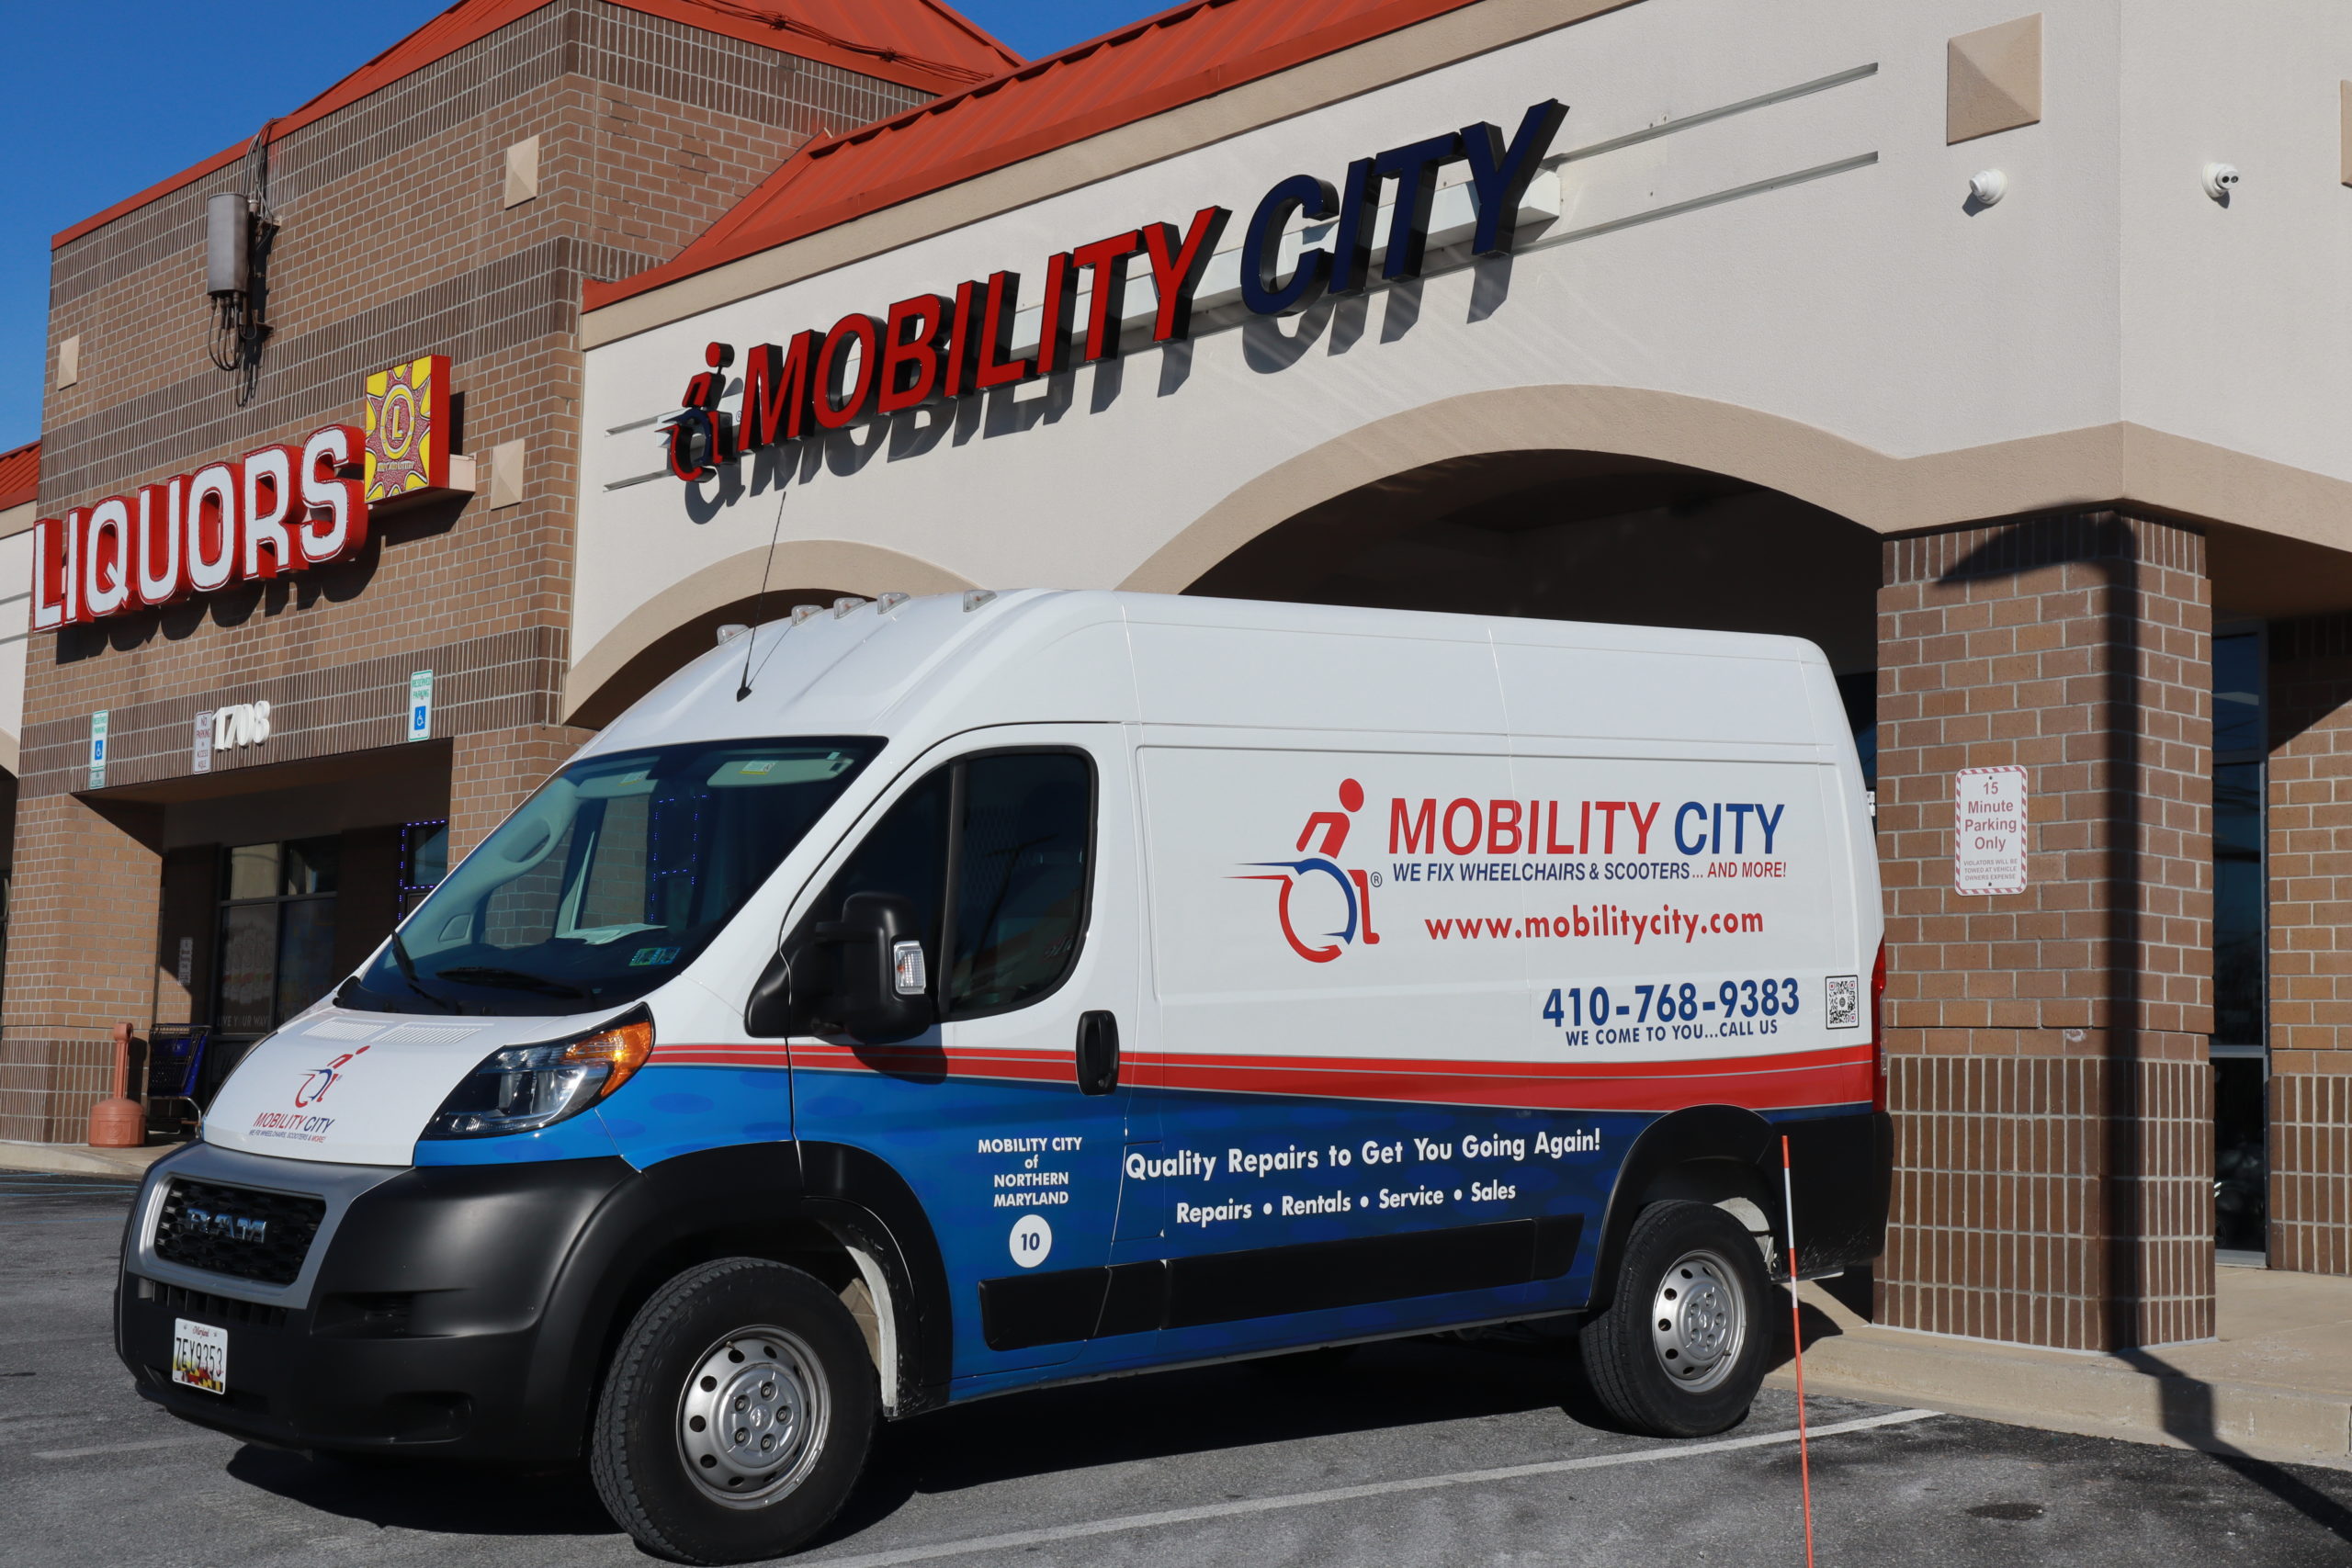 mobility city pic 1